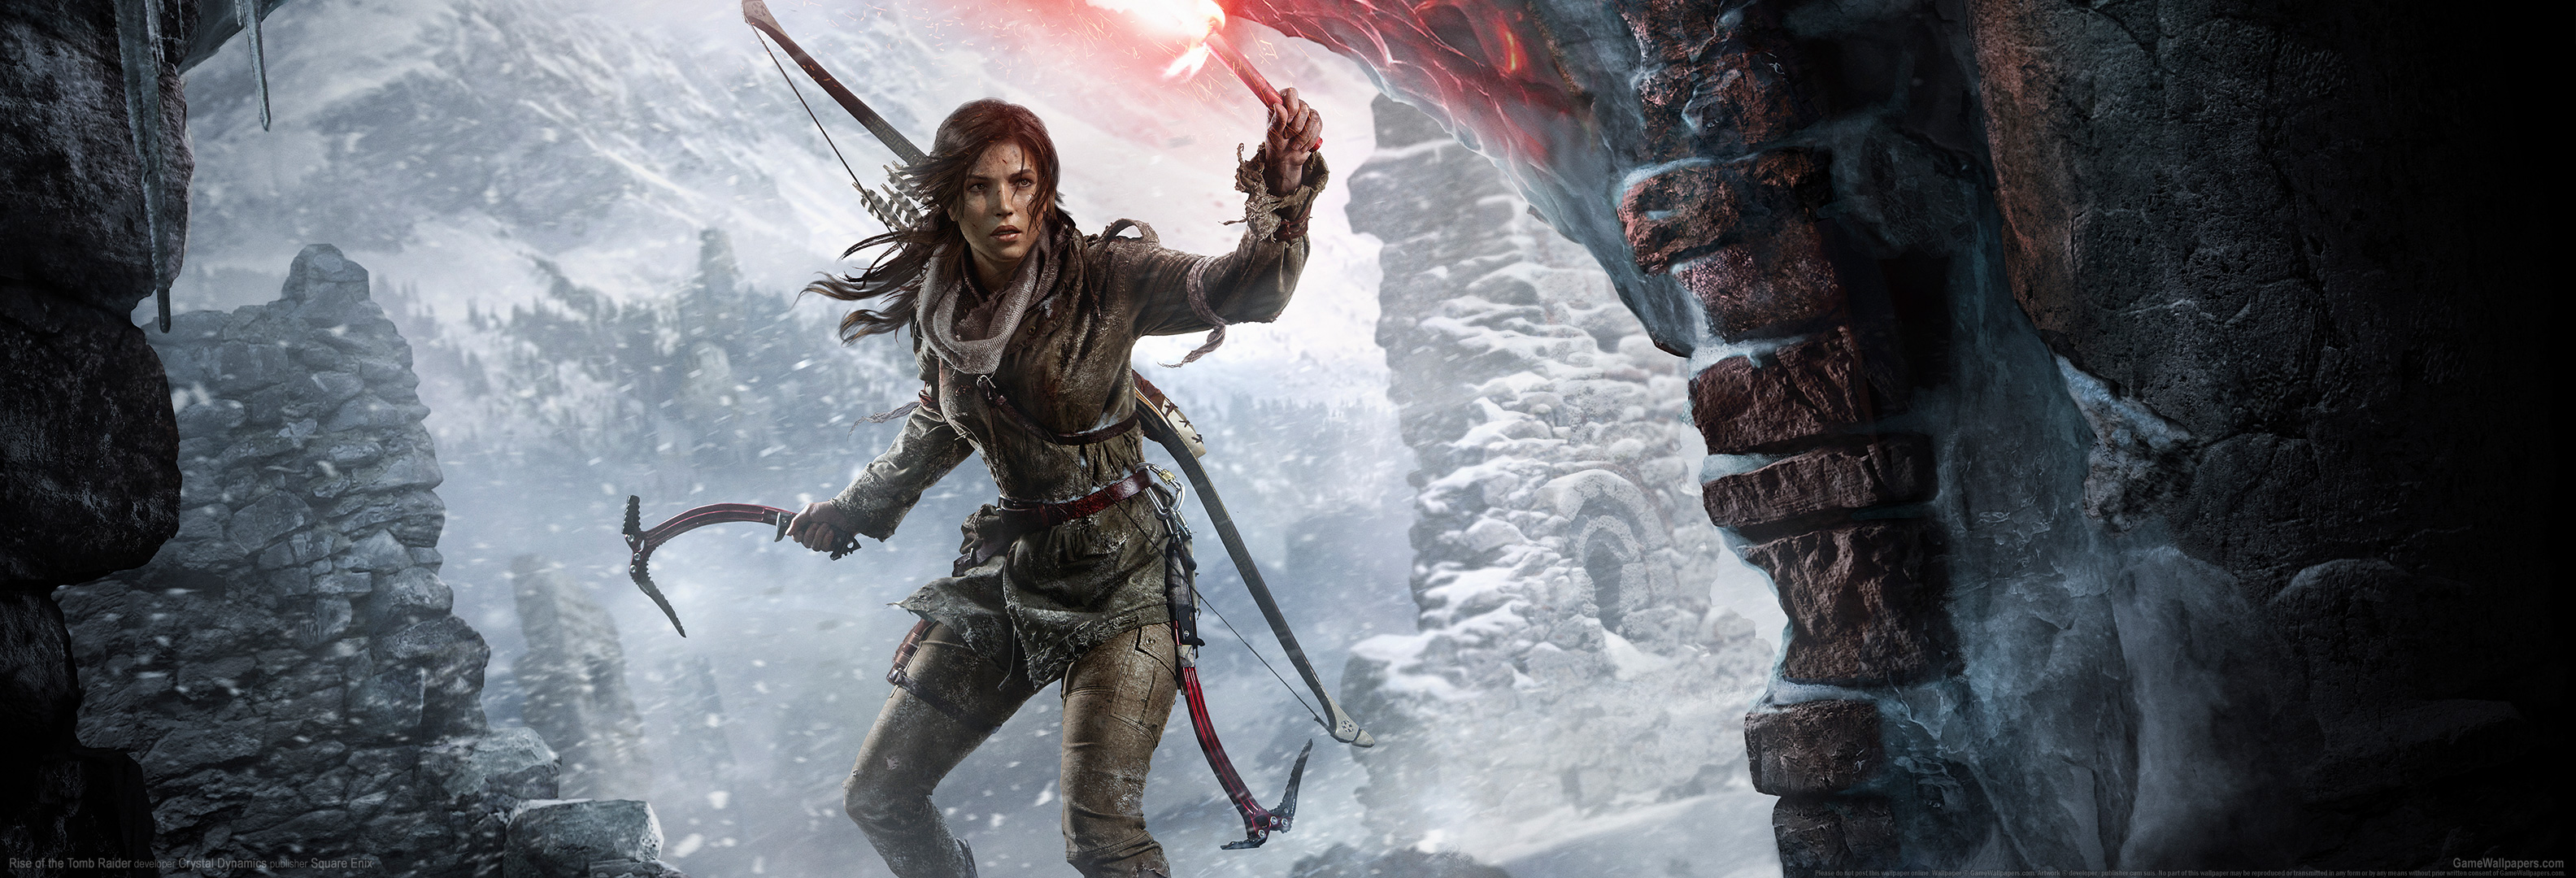 Rise of the Tomb Raider wallpaper 11 3168x1080